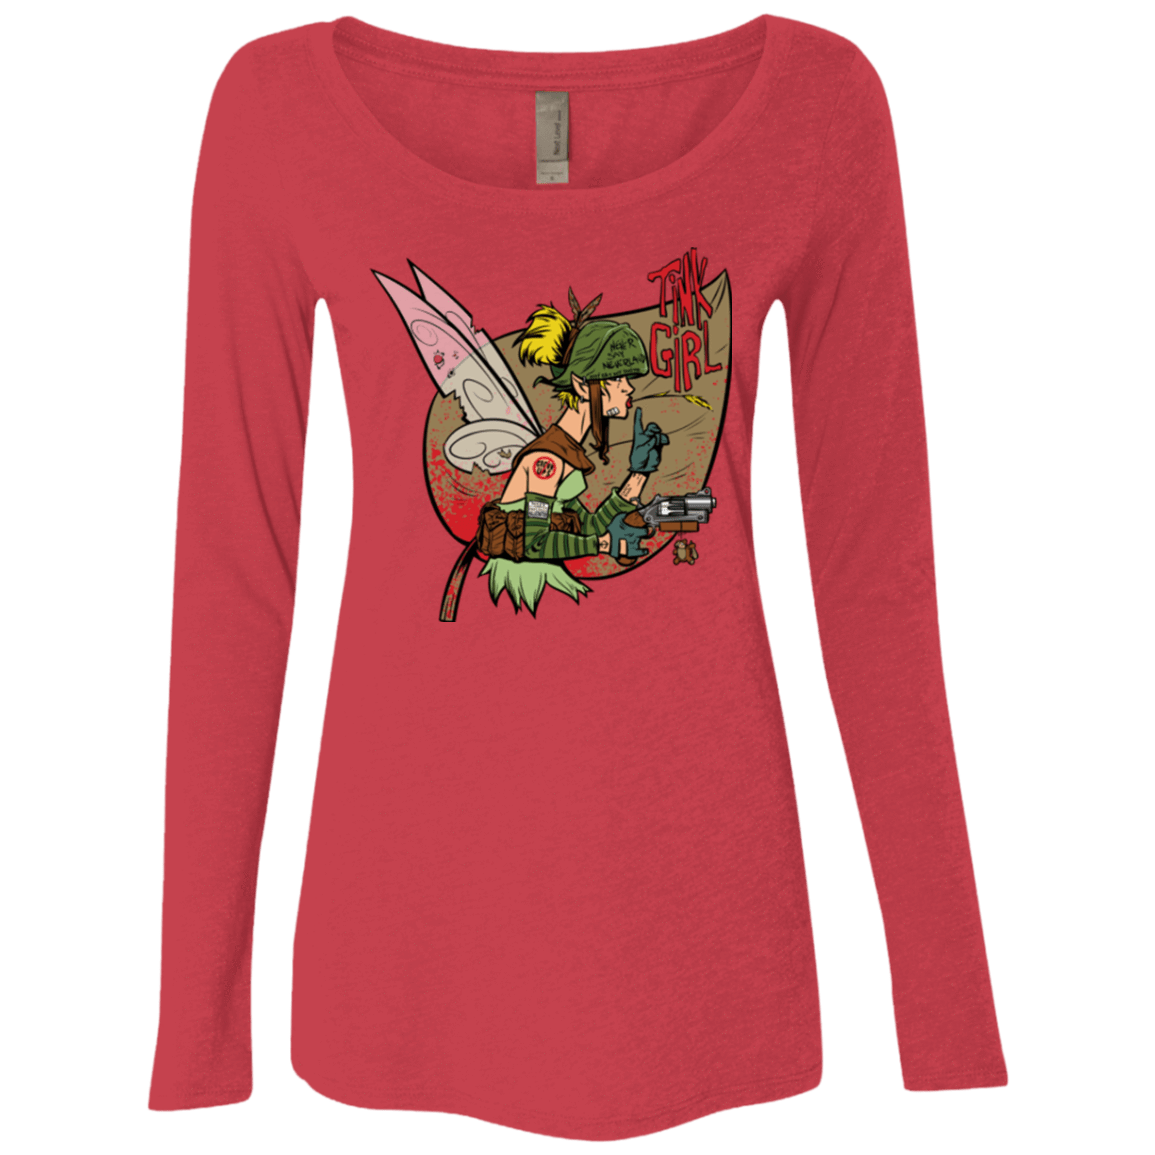 T-Shirts Vintage Red / Small Tink Girl Women's Triblend Long Sleeve Shirt